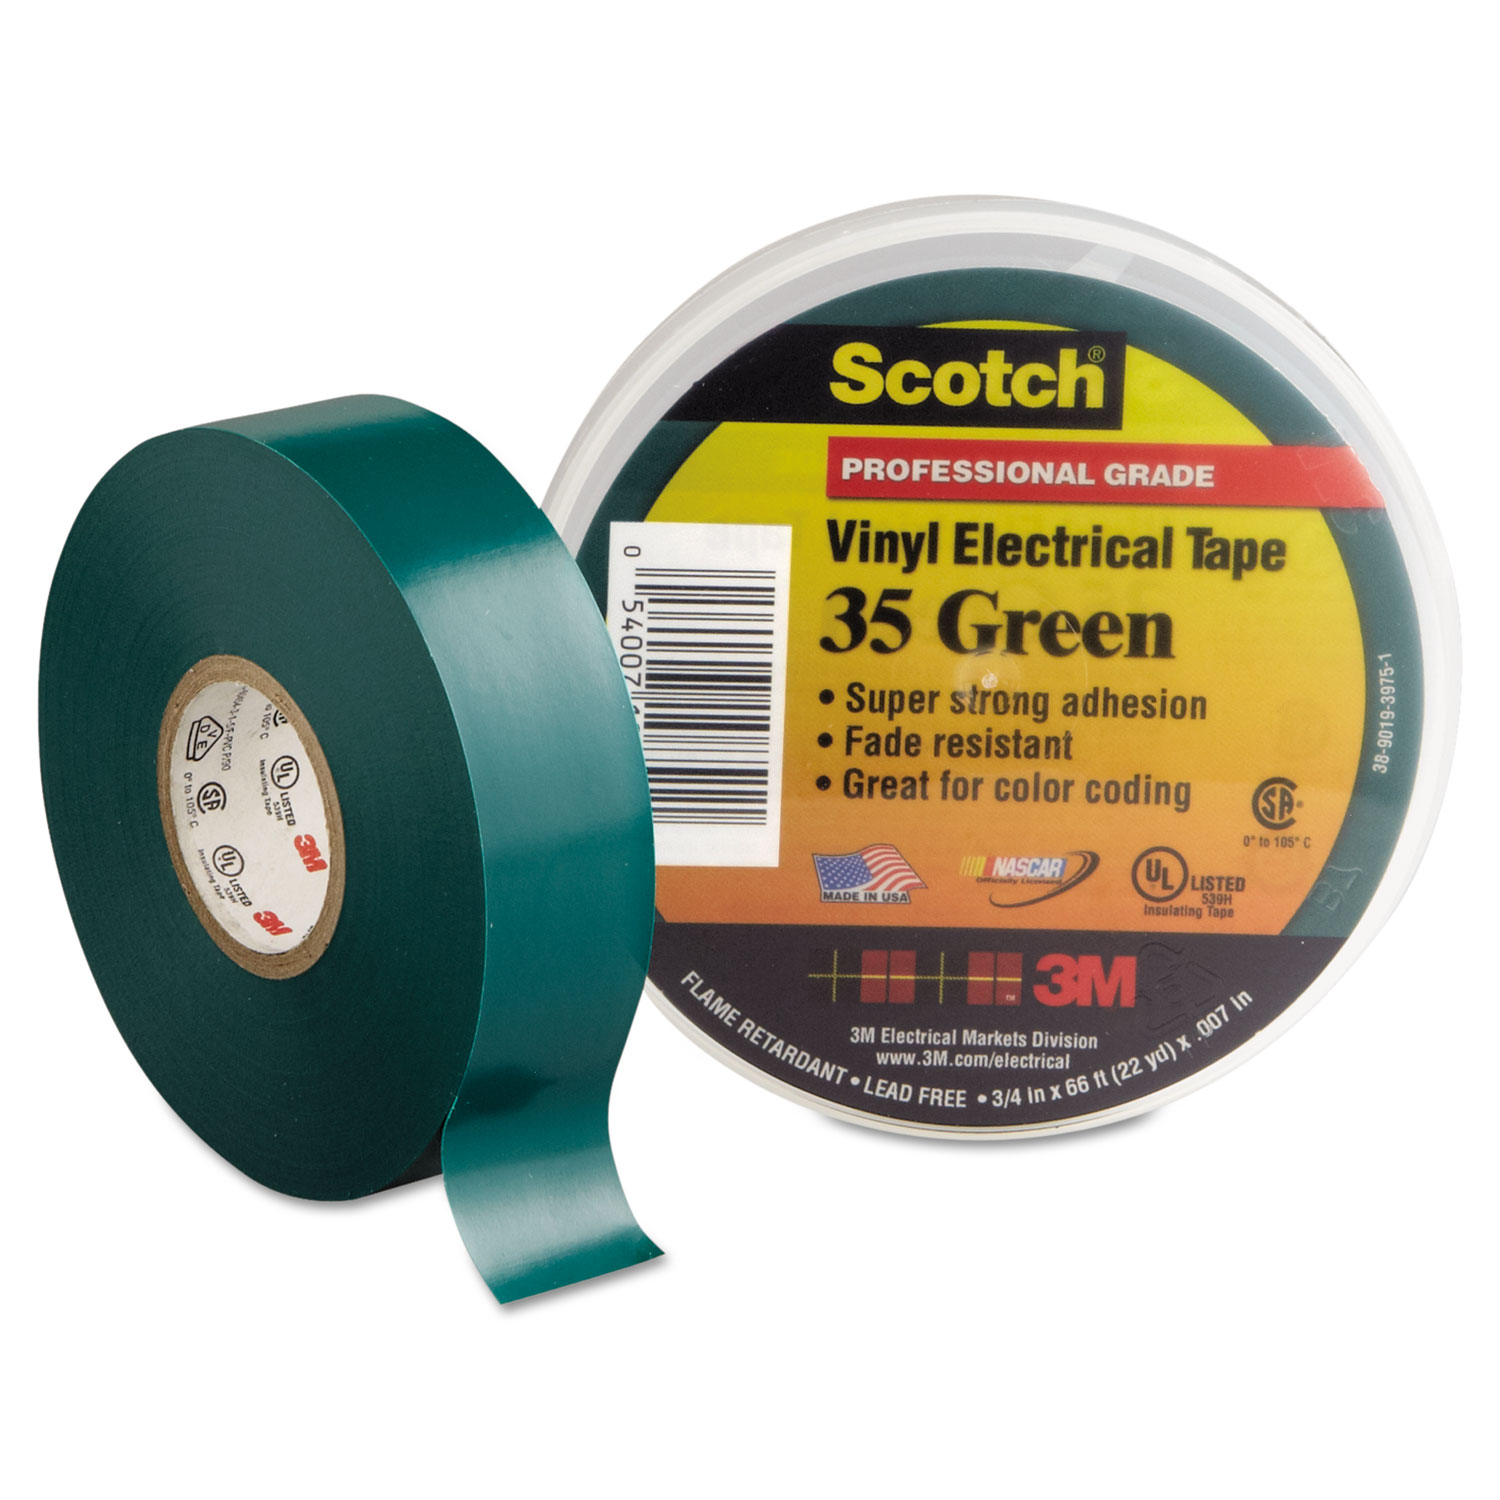 Scotch 35 Vinyl Electrical Color Coding Tape, 3/4 x 66ft, Green